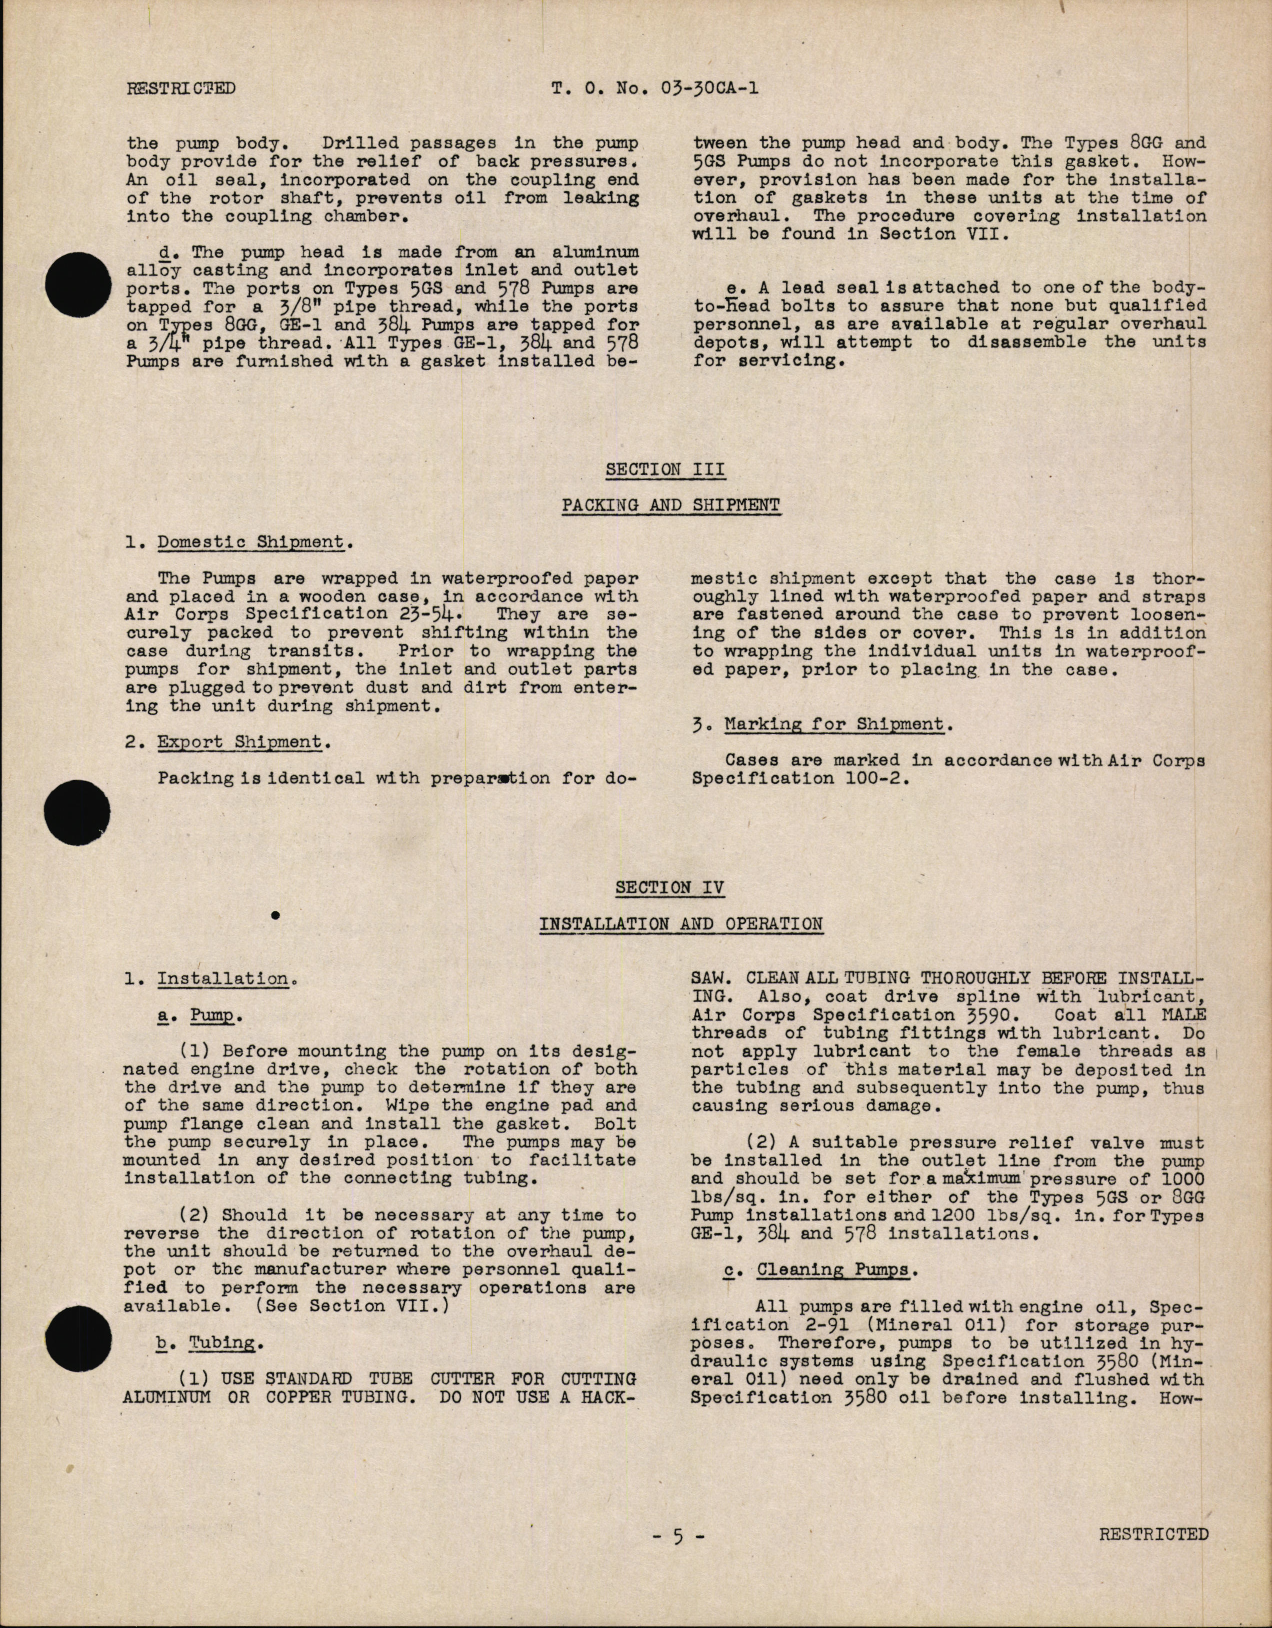 Sample page 7 from AirCorps Library document: Handbook of Instructions for Engine-Driven Hydraulic Pumps 